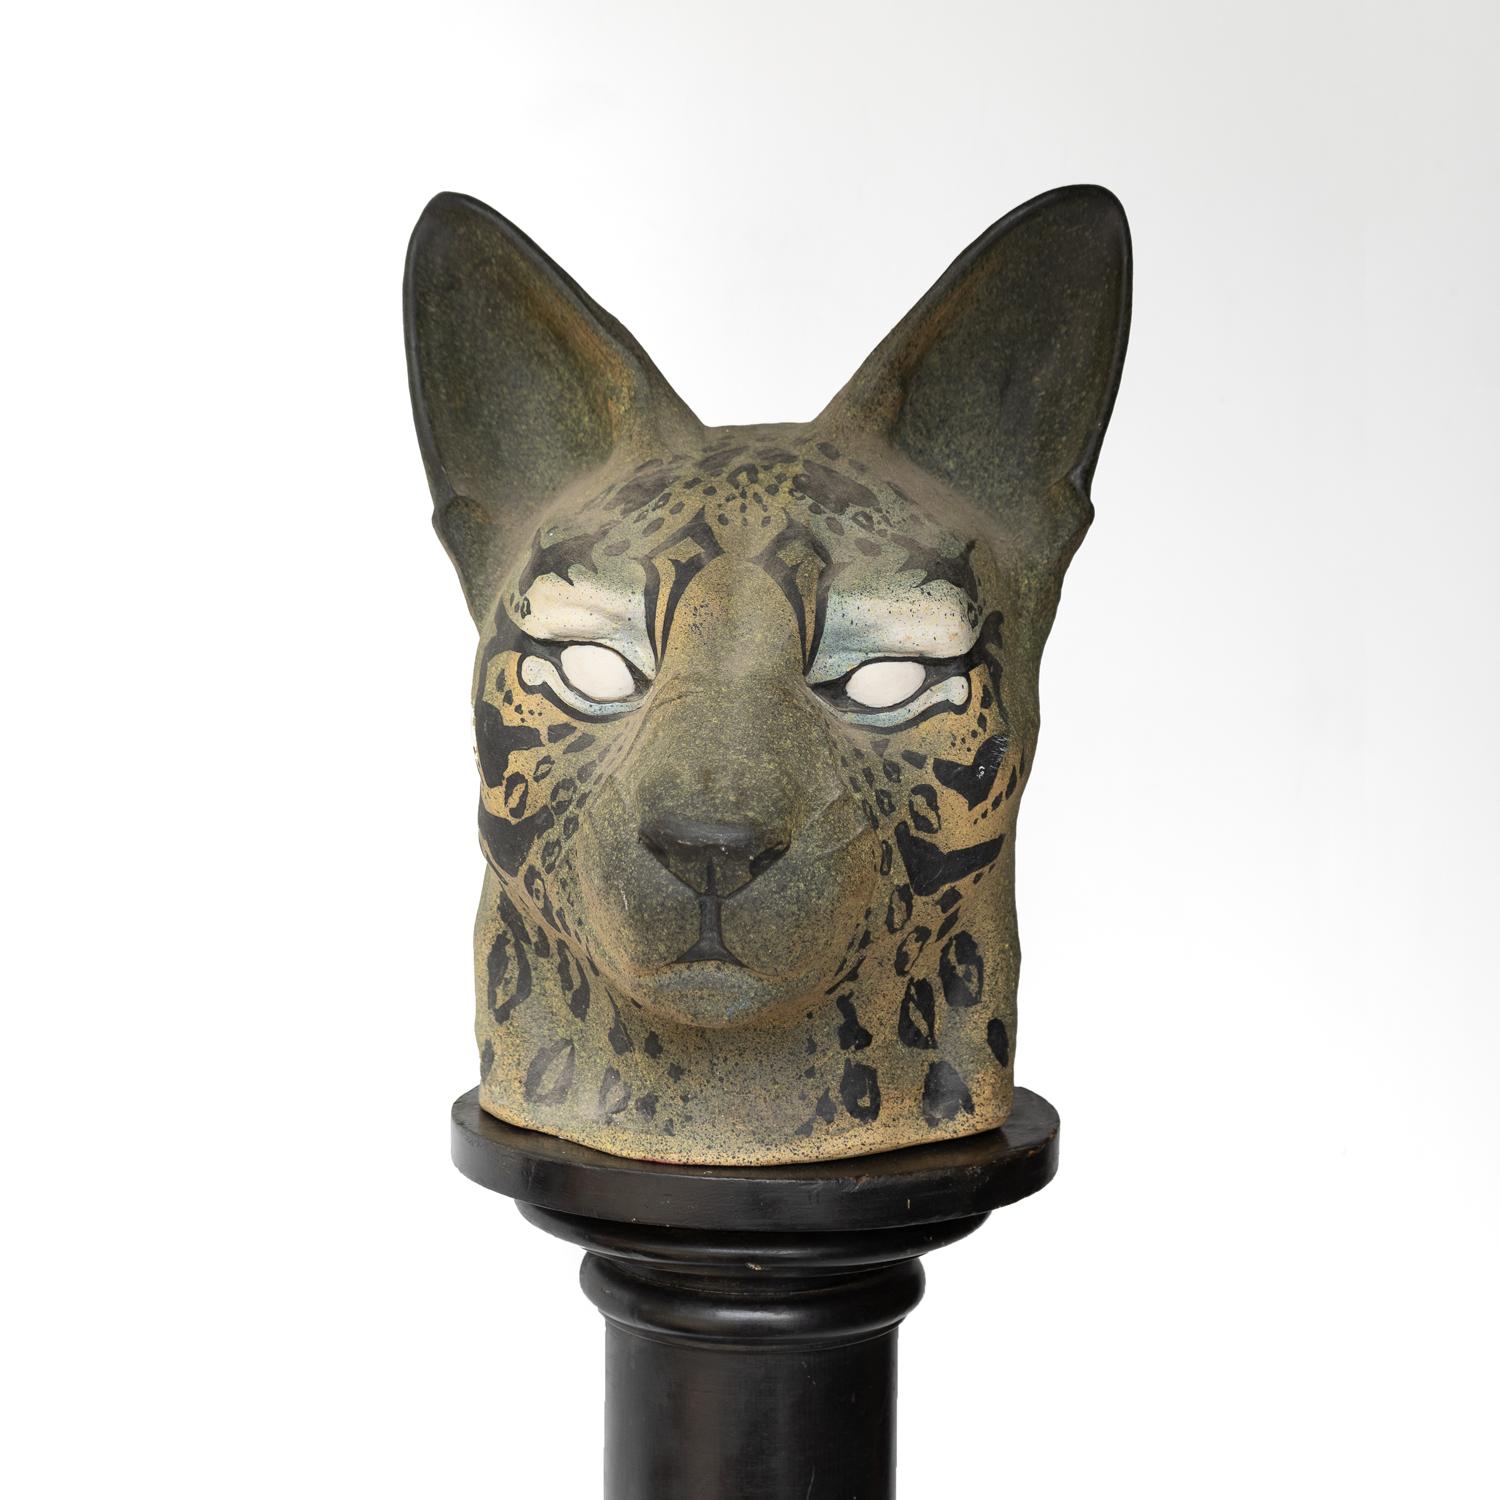 LARGE VINTAGE CERAMIC SCI-FI INSPIRED CAT HEAD SCULPTURE, 1970S

Part science fiction, part leopard, part ancient Egyptian god this sculpture depicts a powerful feline with green and yellow skin tones, blue eye shadow and piercing white eyes, and